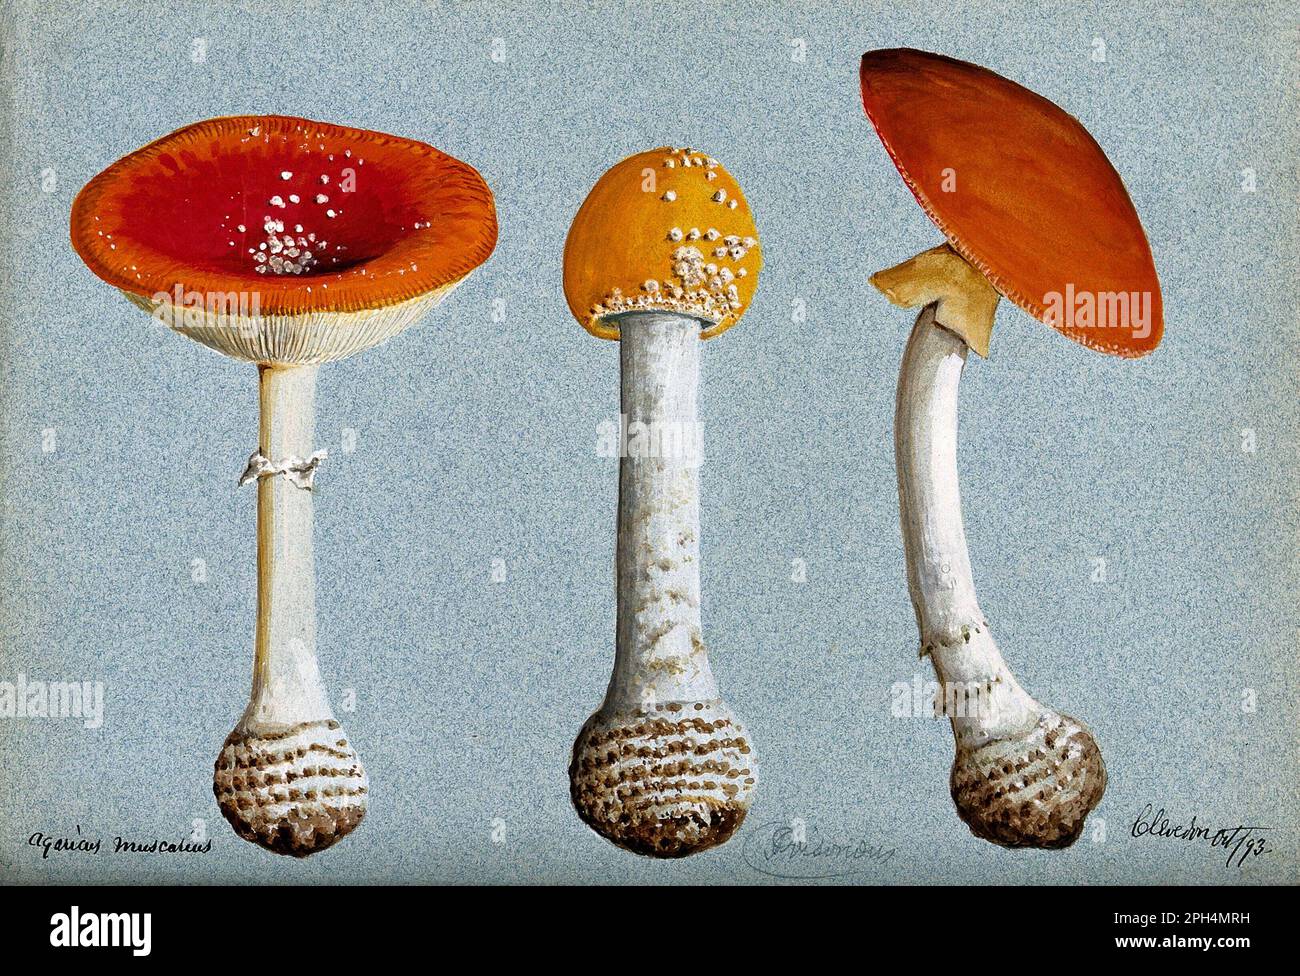 Amanita muscaria, commonly known as the Fly agaric or Fly amanita, vintage watercolour from 1893 Stock Photo